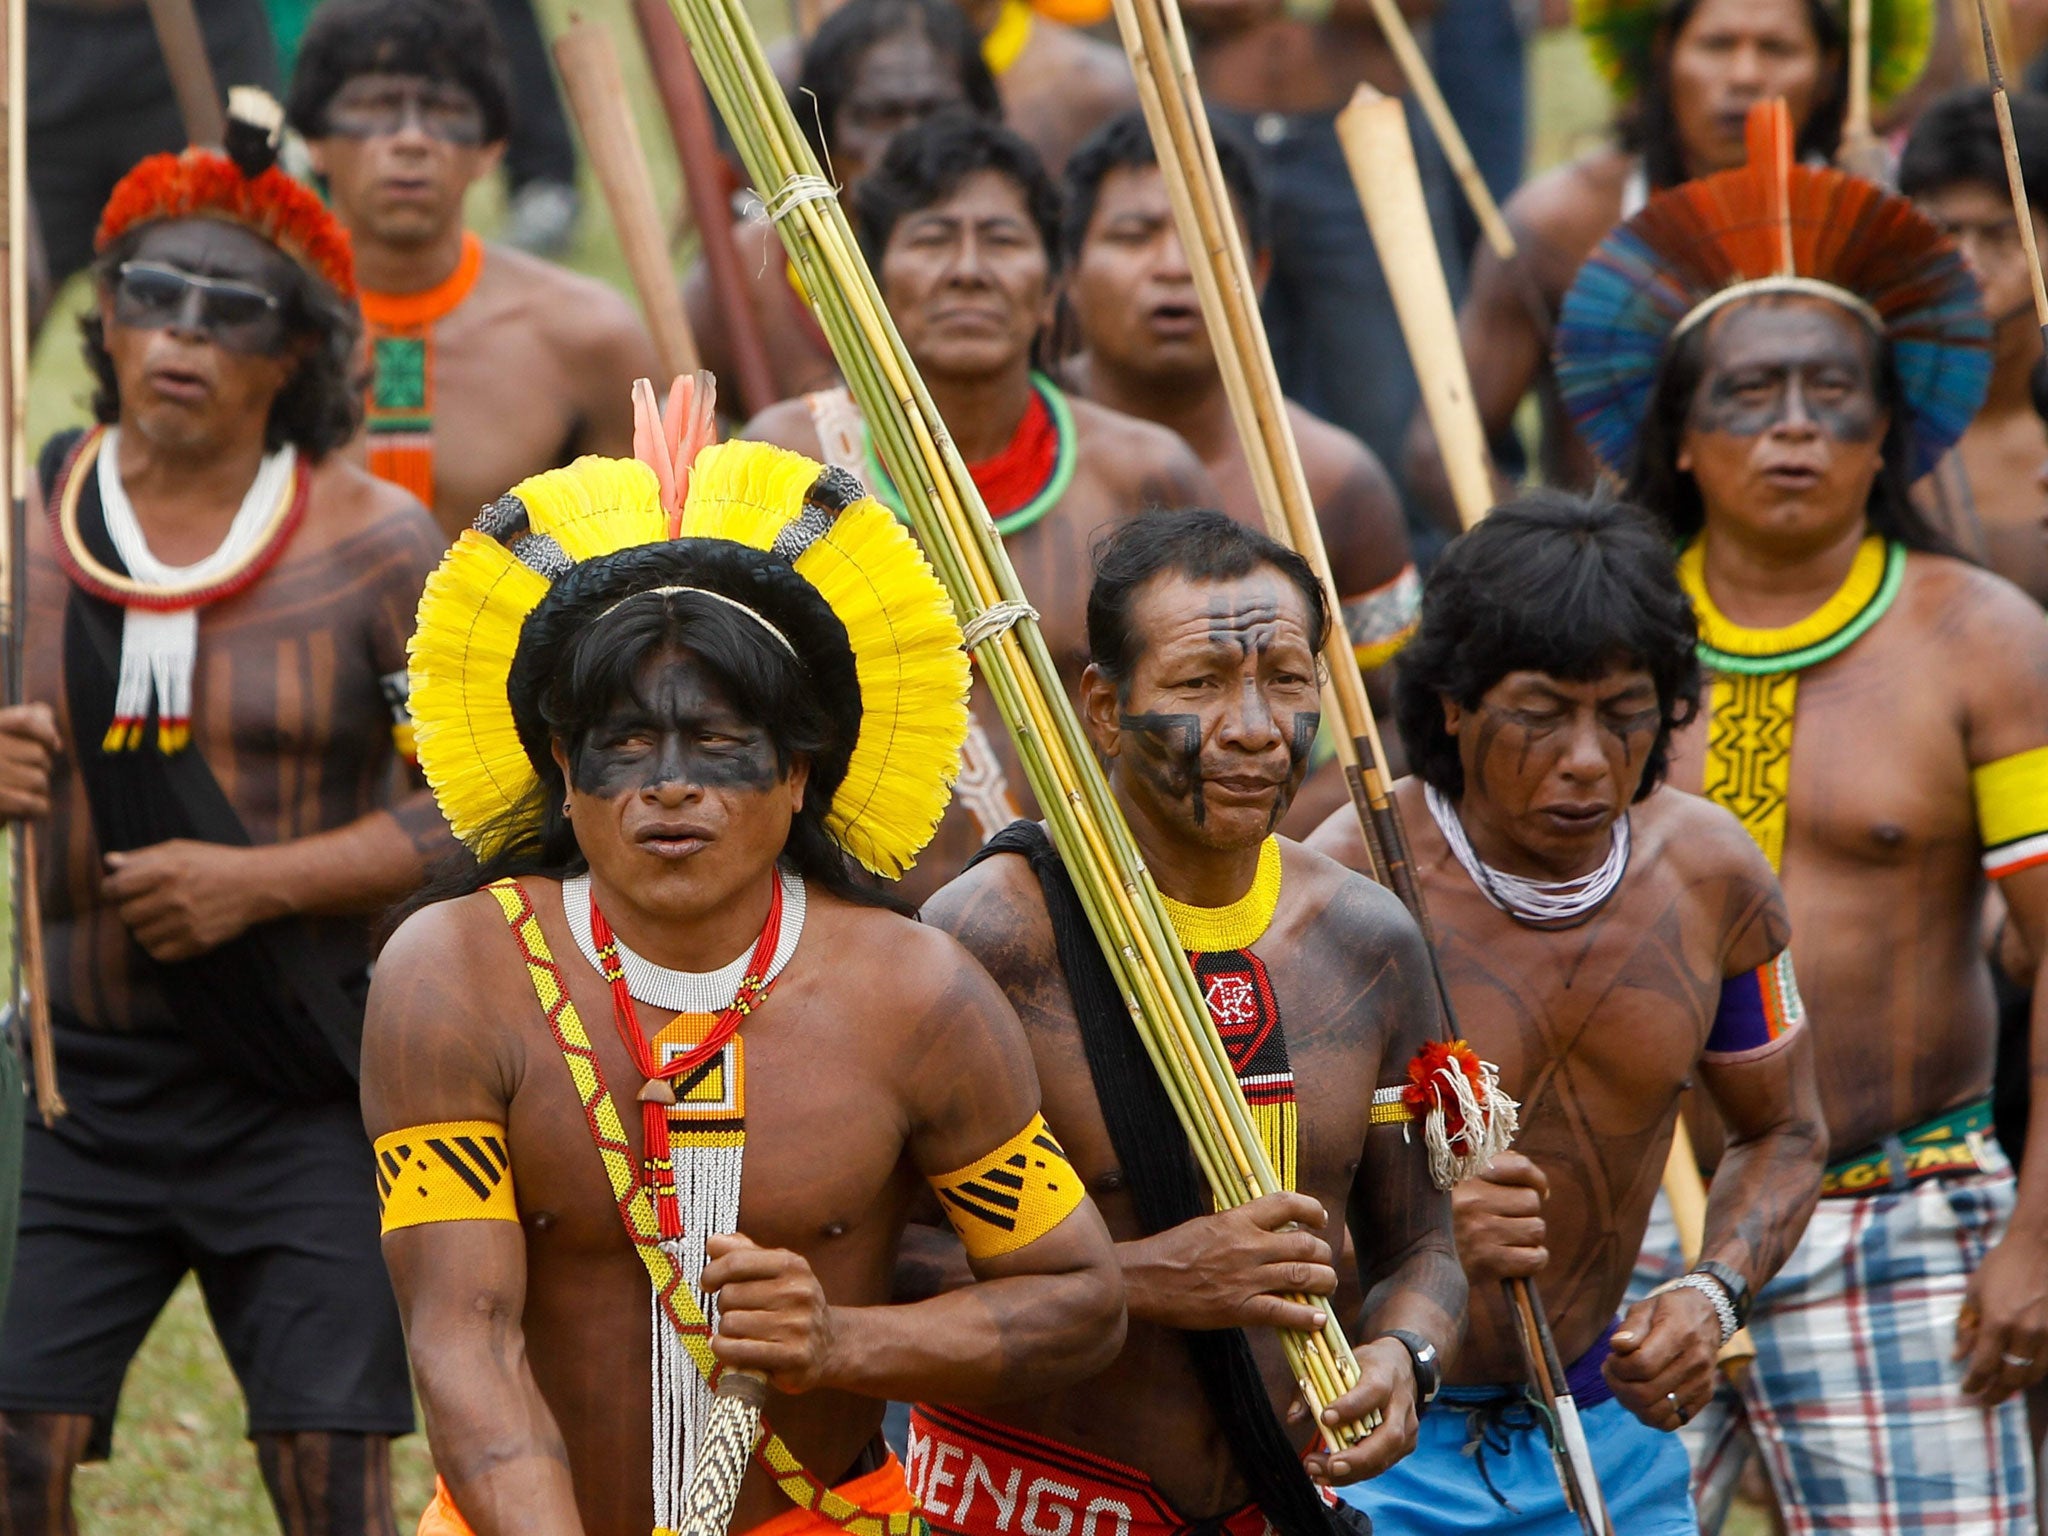 Indigenous people in the Brazilian Amazon will be trained to shoot in a competitive environment